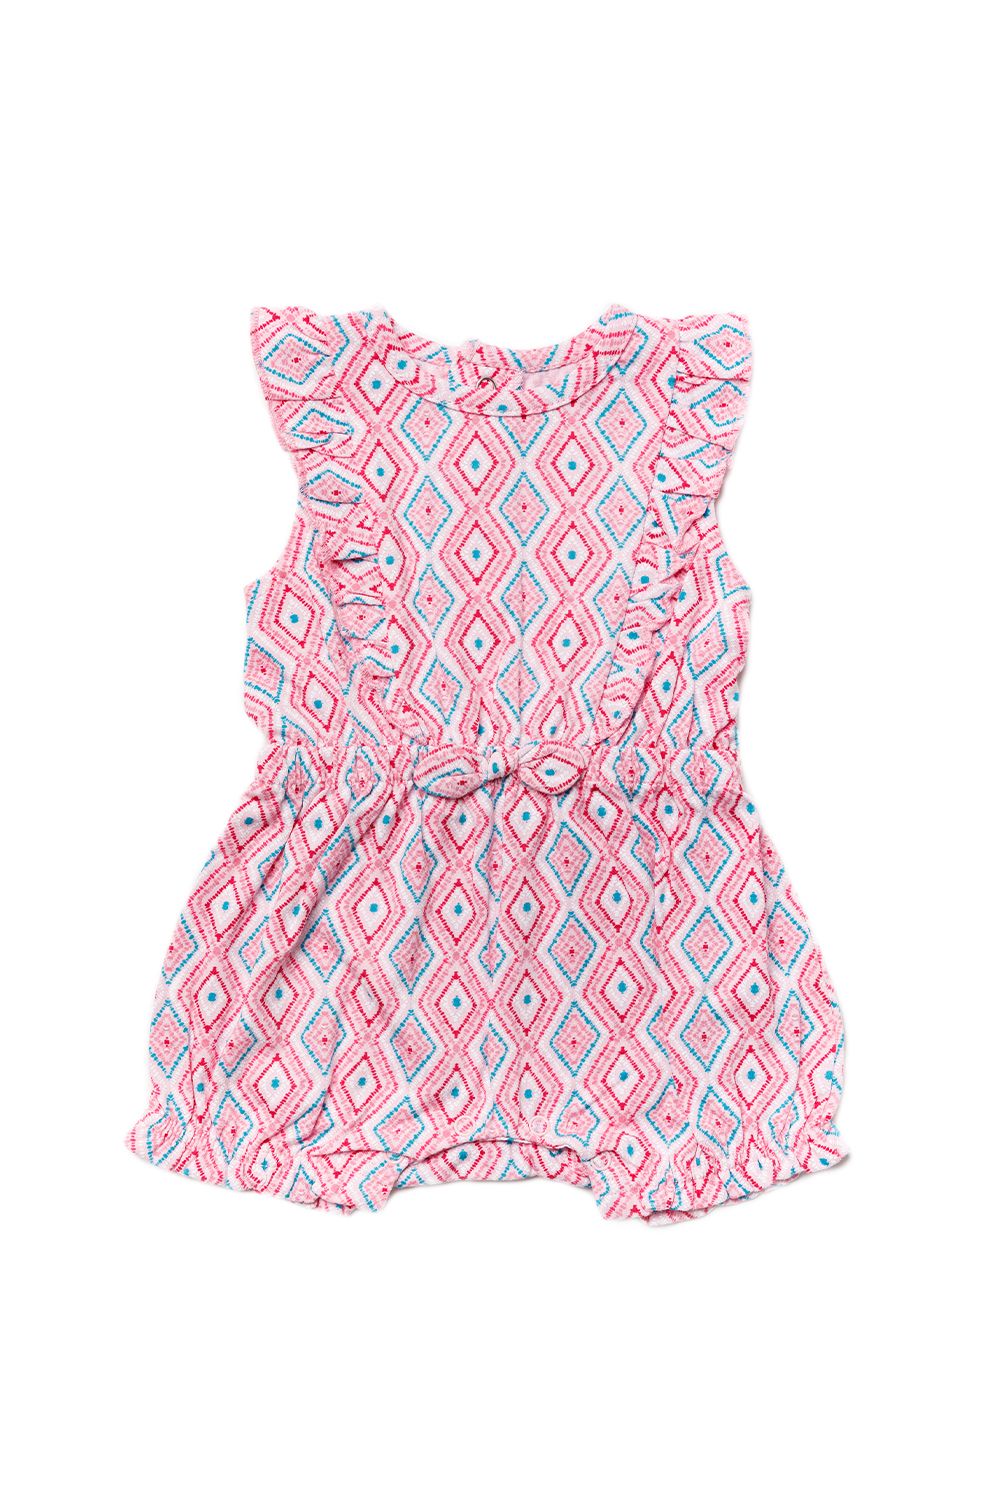 This Miss playsuit features a gorgeous geometric all-over print. The arms and legs both have frill detailing and a little bow on the waistband. The playsuit is cotton and has popper fastenings, keeping your little one comfortable. The Miss line captures a playful and pretty style for your little one’s wardrobe, This piece would also make a lovely summer gift.